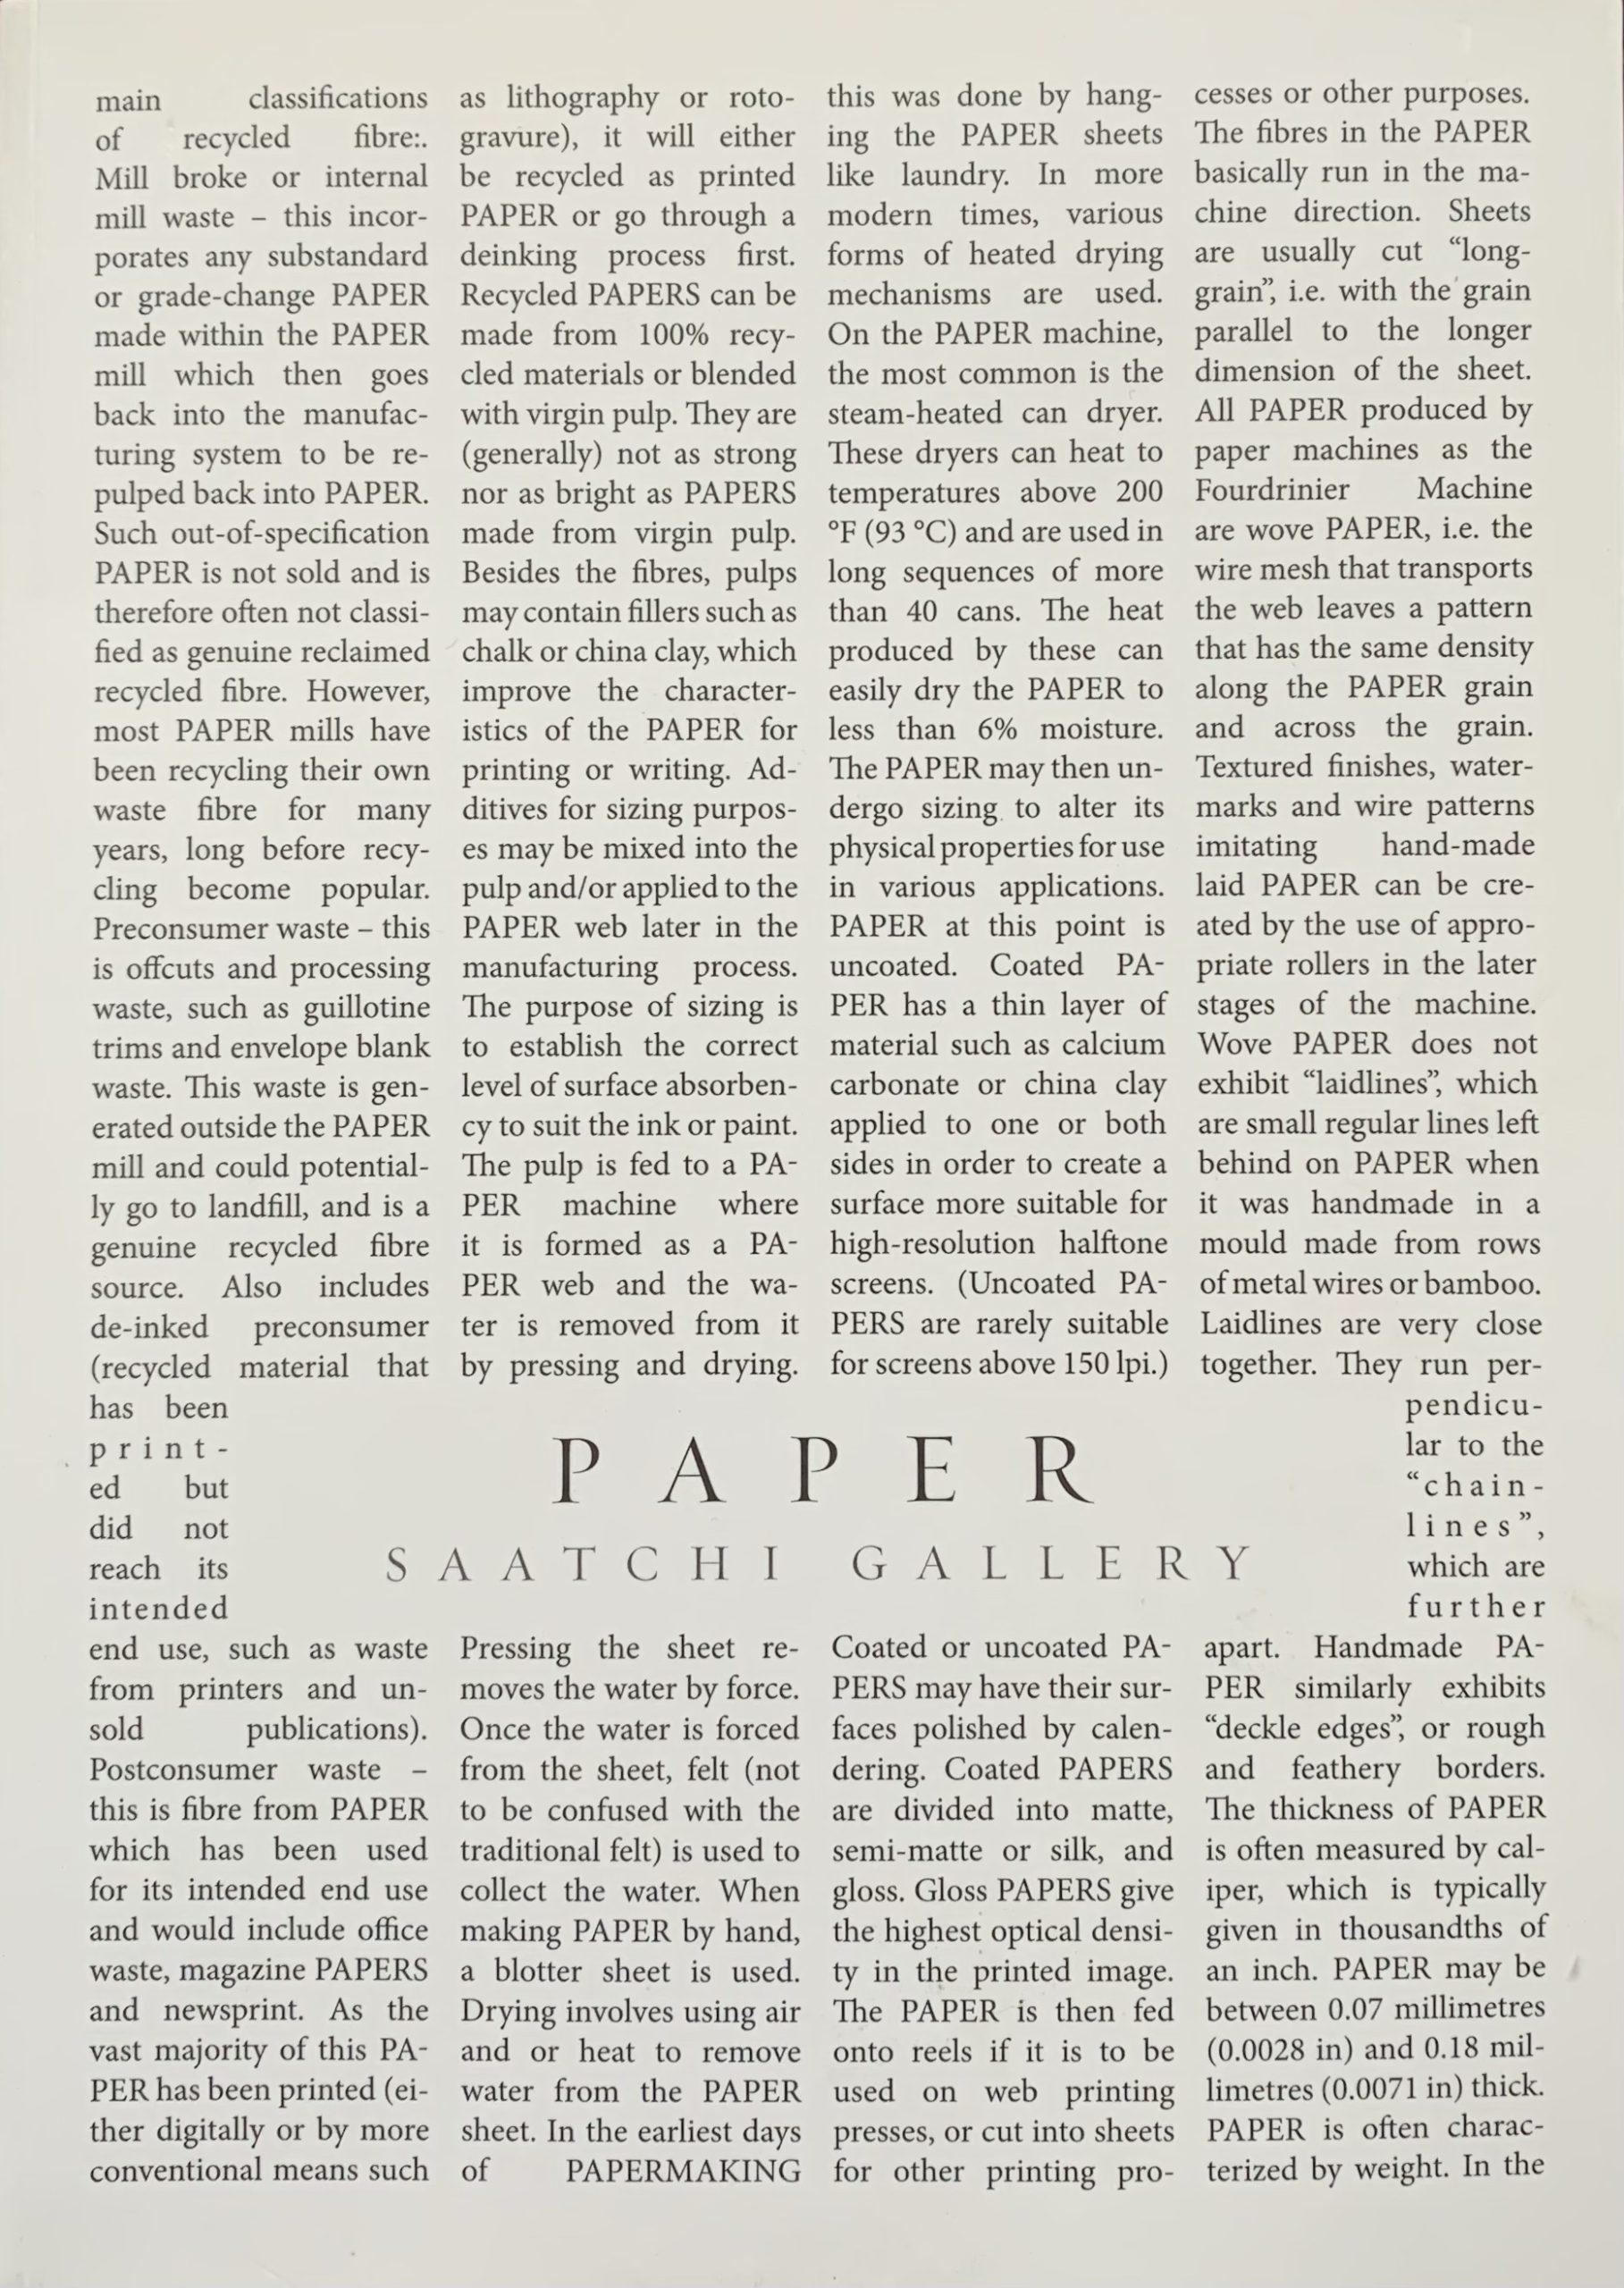 Paper by Saatchi Gallery (Exhibition Book/Catalogue)